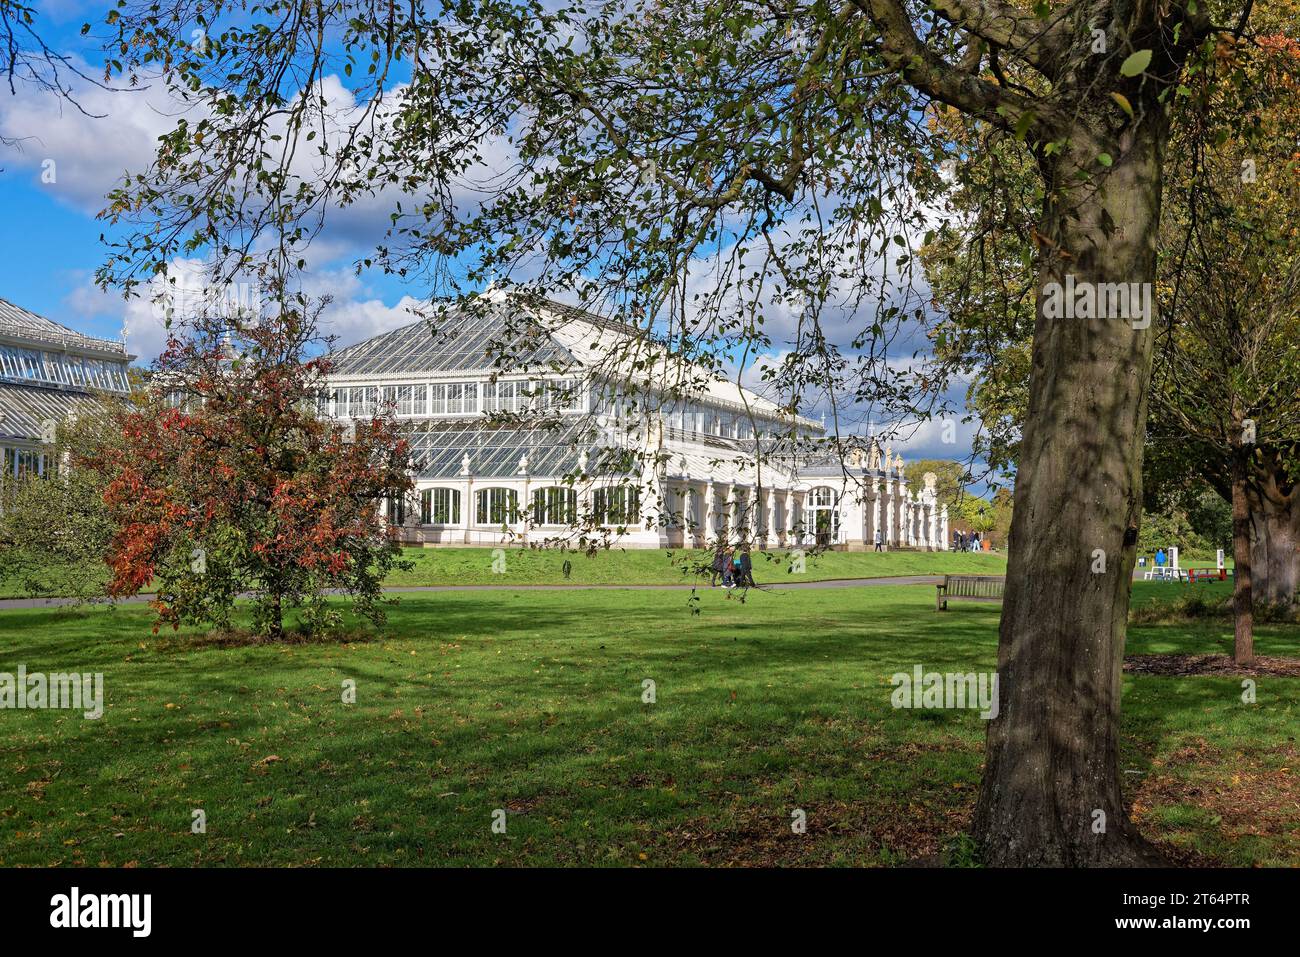 Exterior of the Temperate House in the Royal Botanic Gardens Kew on a sunny autumnal day, West London England UK Stock Photo